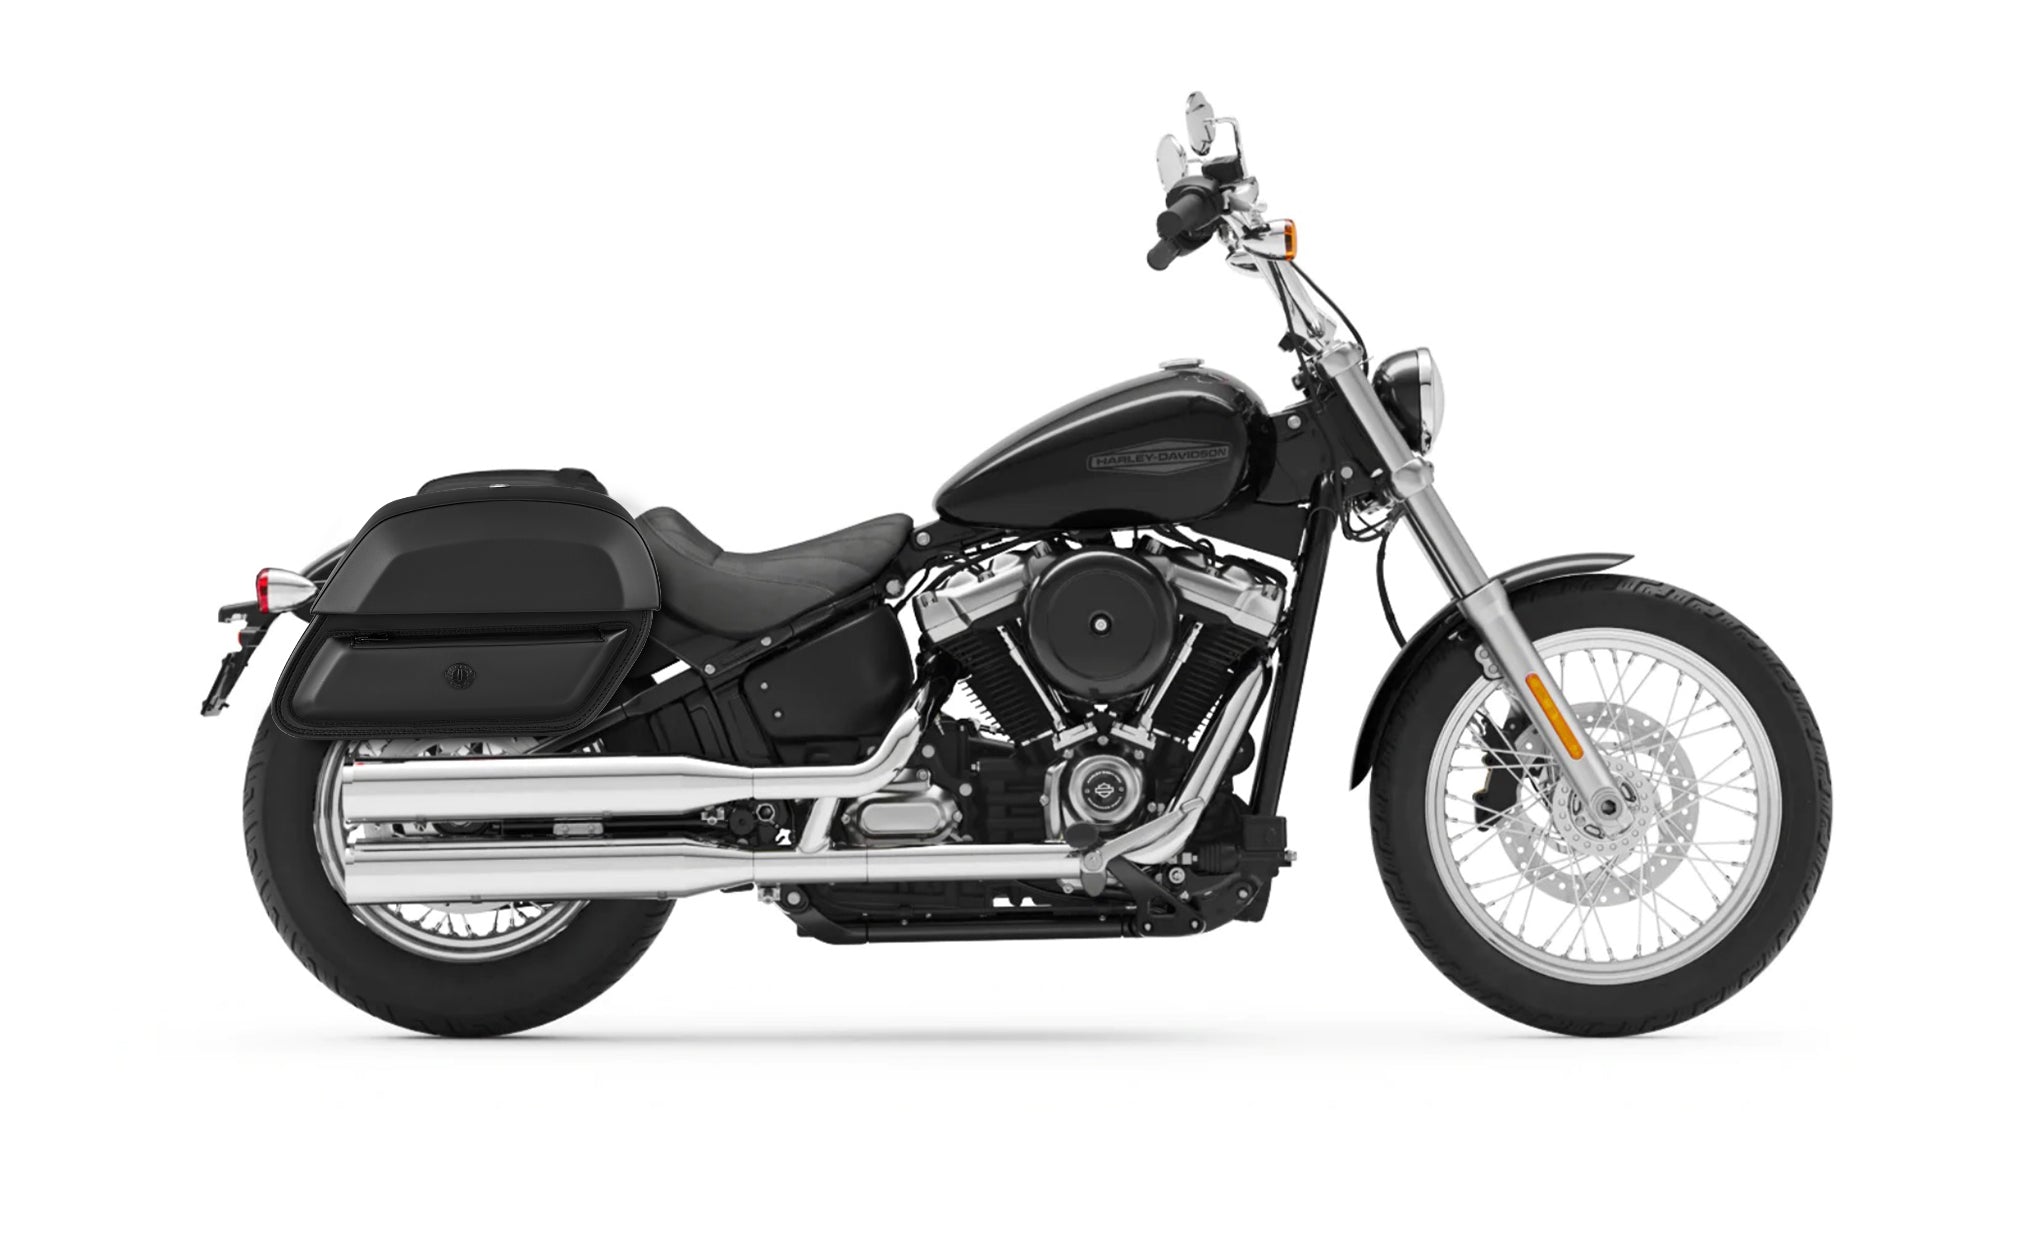 28L - Wraith Medium Leather Saddlebags for Harley Softail Standard FXST BAG on Bike View @expand